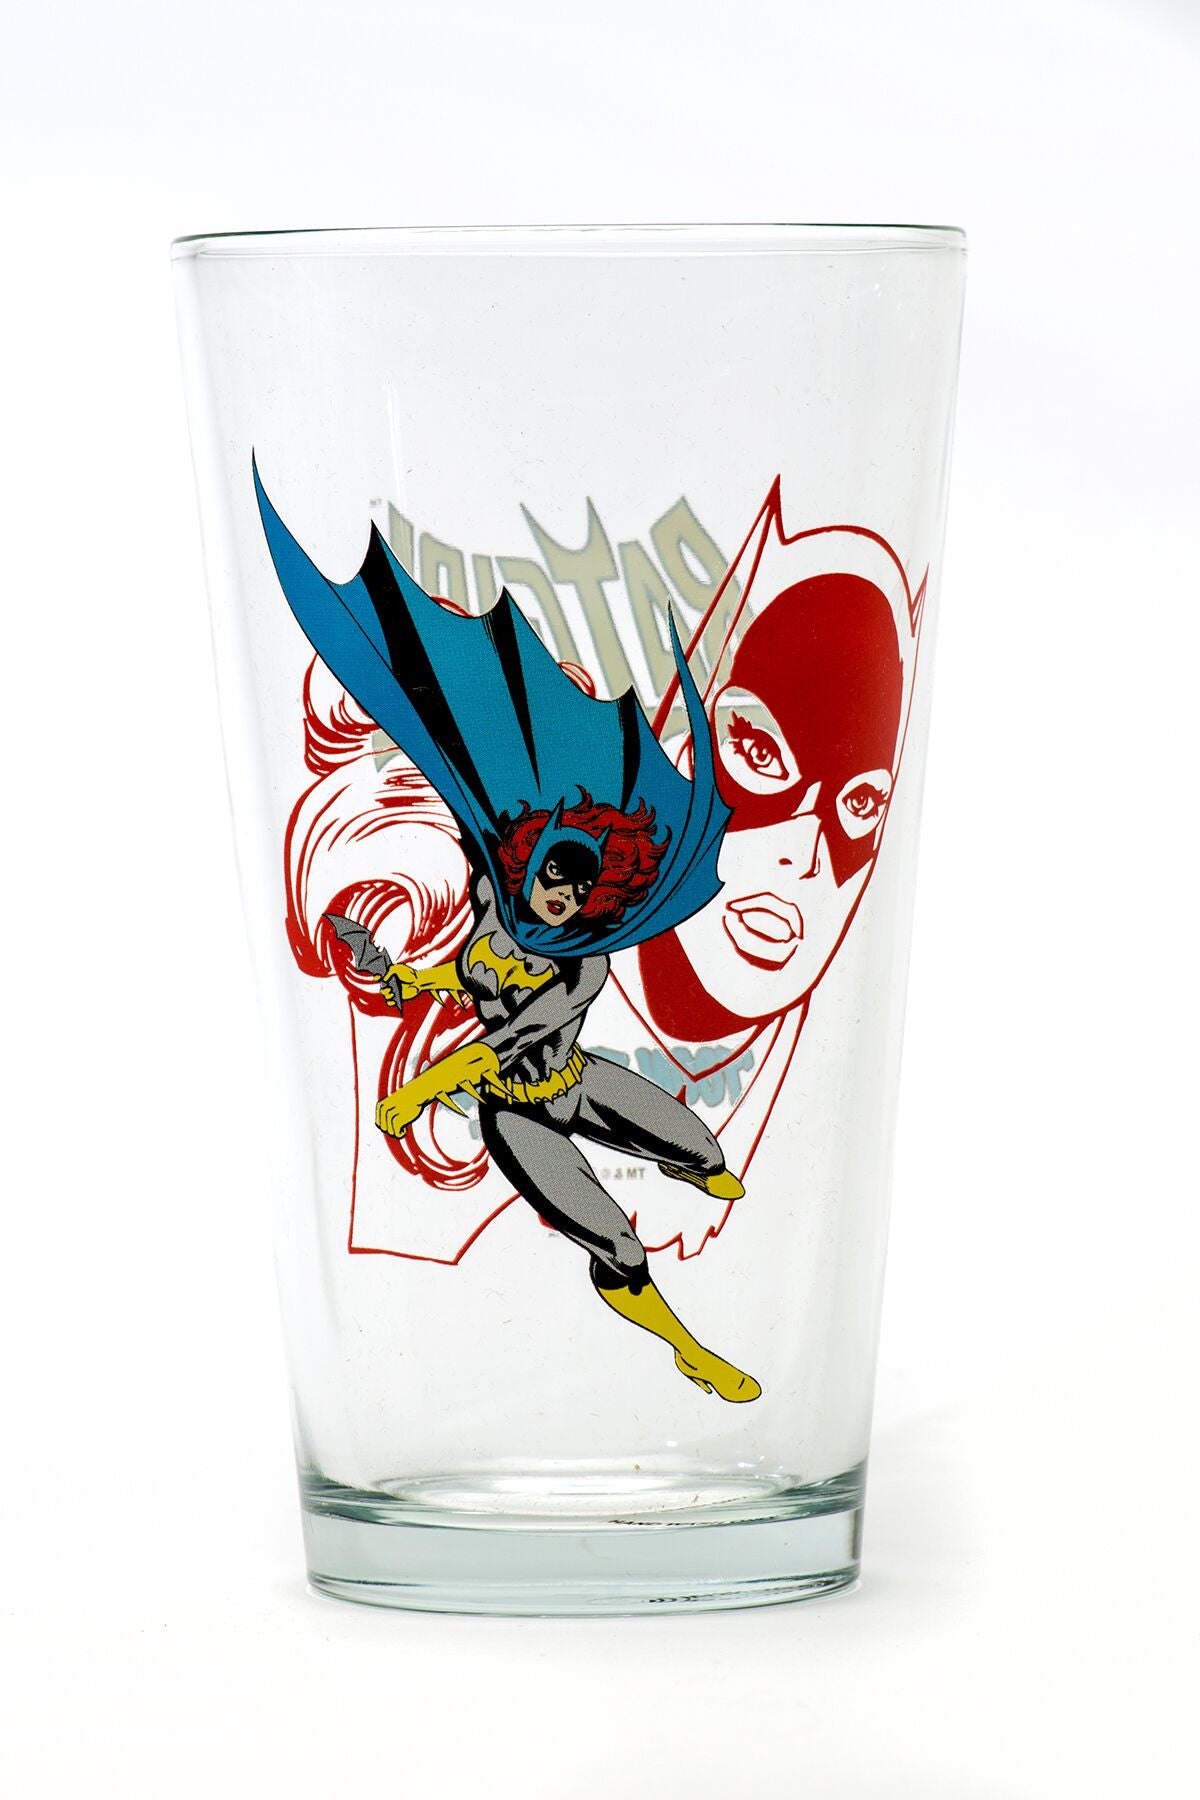 DC Comics Vintage Style Drinking Glass (Toon Tumbler) – Hollywood